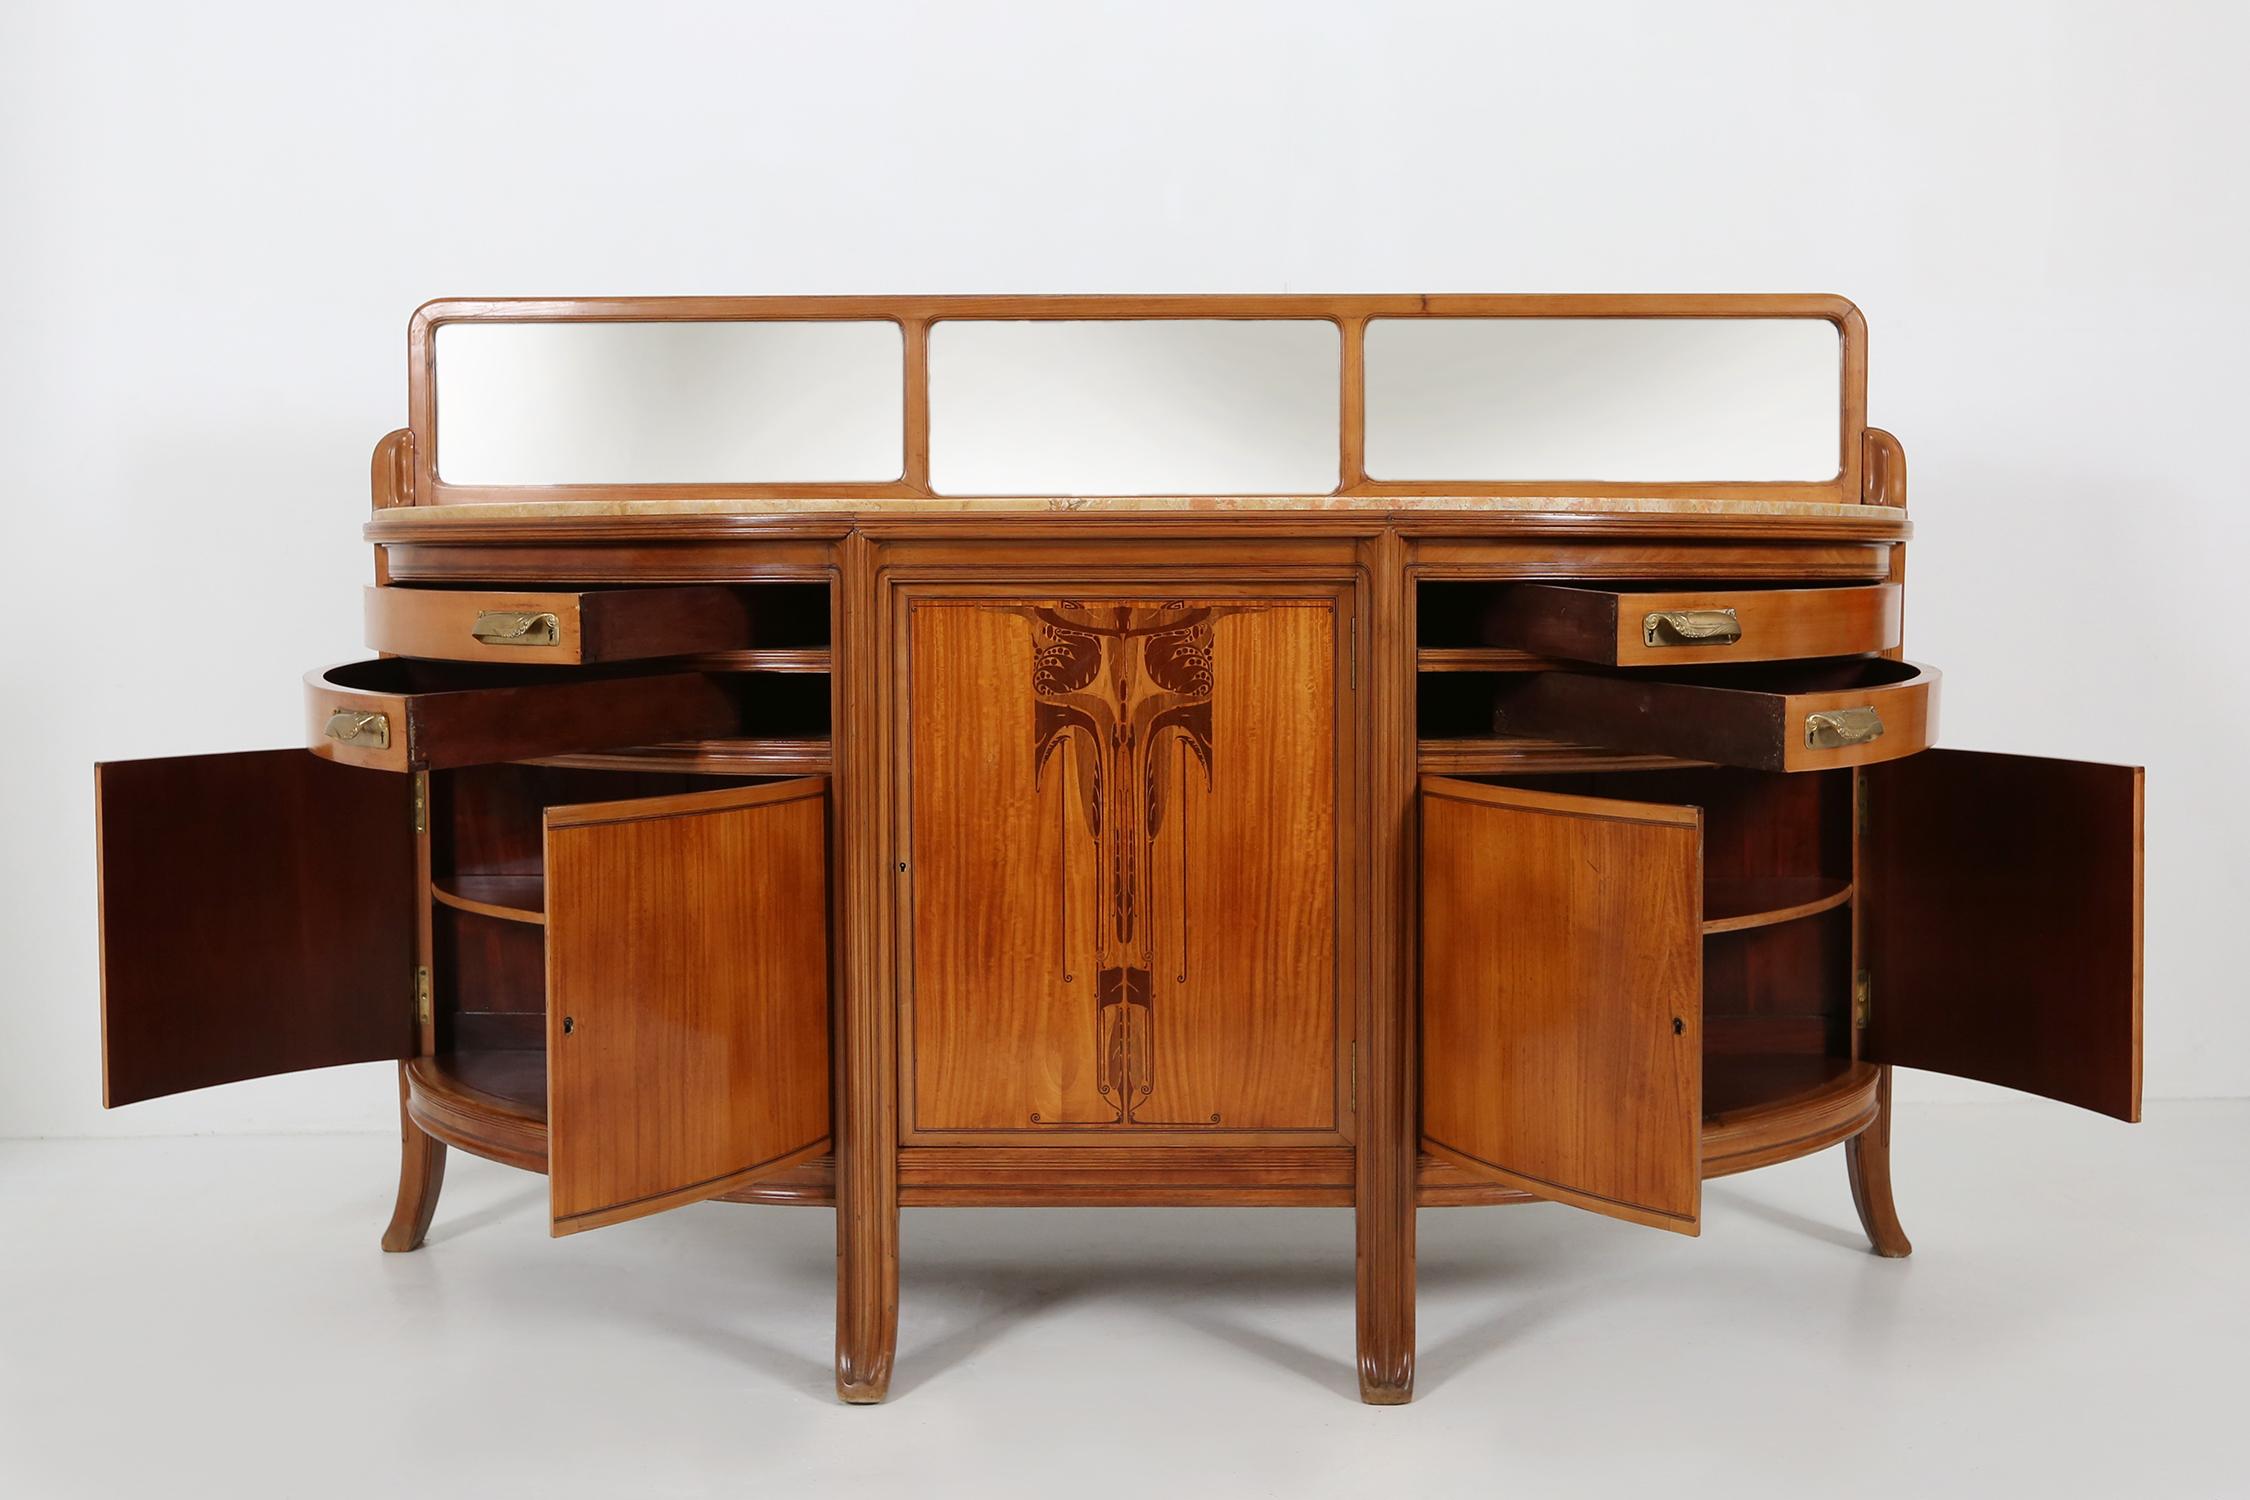 Bronze Art Deco Sideboard by Maurice Dufrène 1911 For Sale